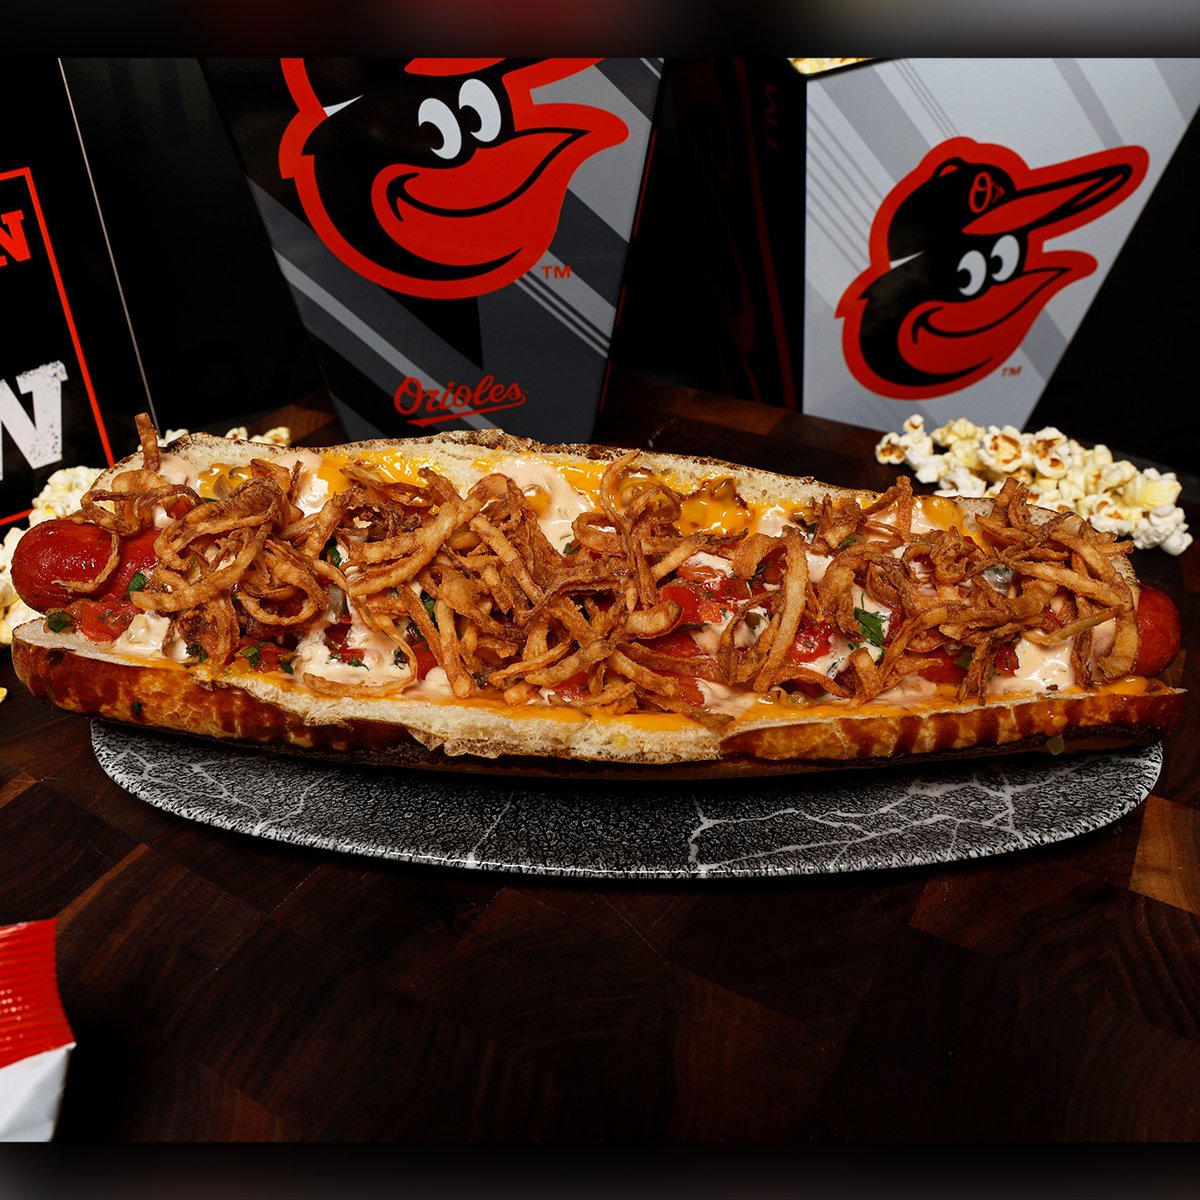 The Orioles will have a fully loaded foot-long hot dog at home games this year called 'The Warehouse Dog' 😳 It's a 12-inch dog with horseradish-infused brick sauce, pit beef queso fundido, pickled pico and onions on a pretzel bun Who could eat a whole one of these? 😂